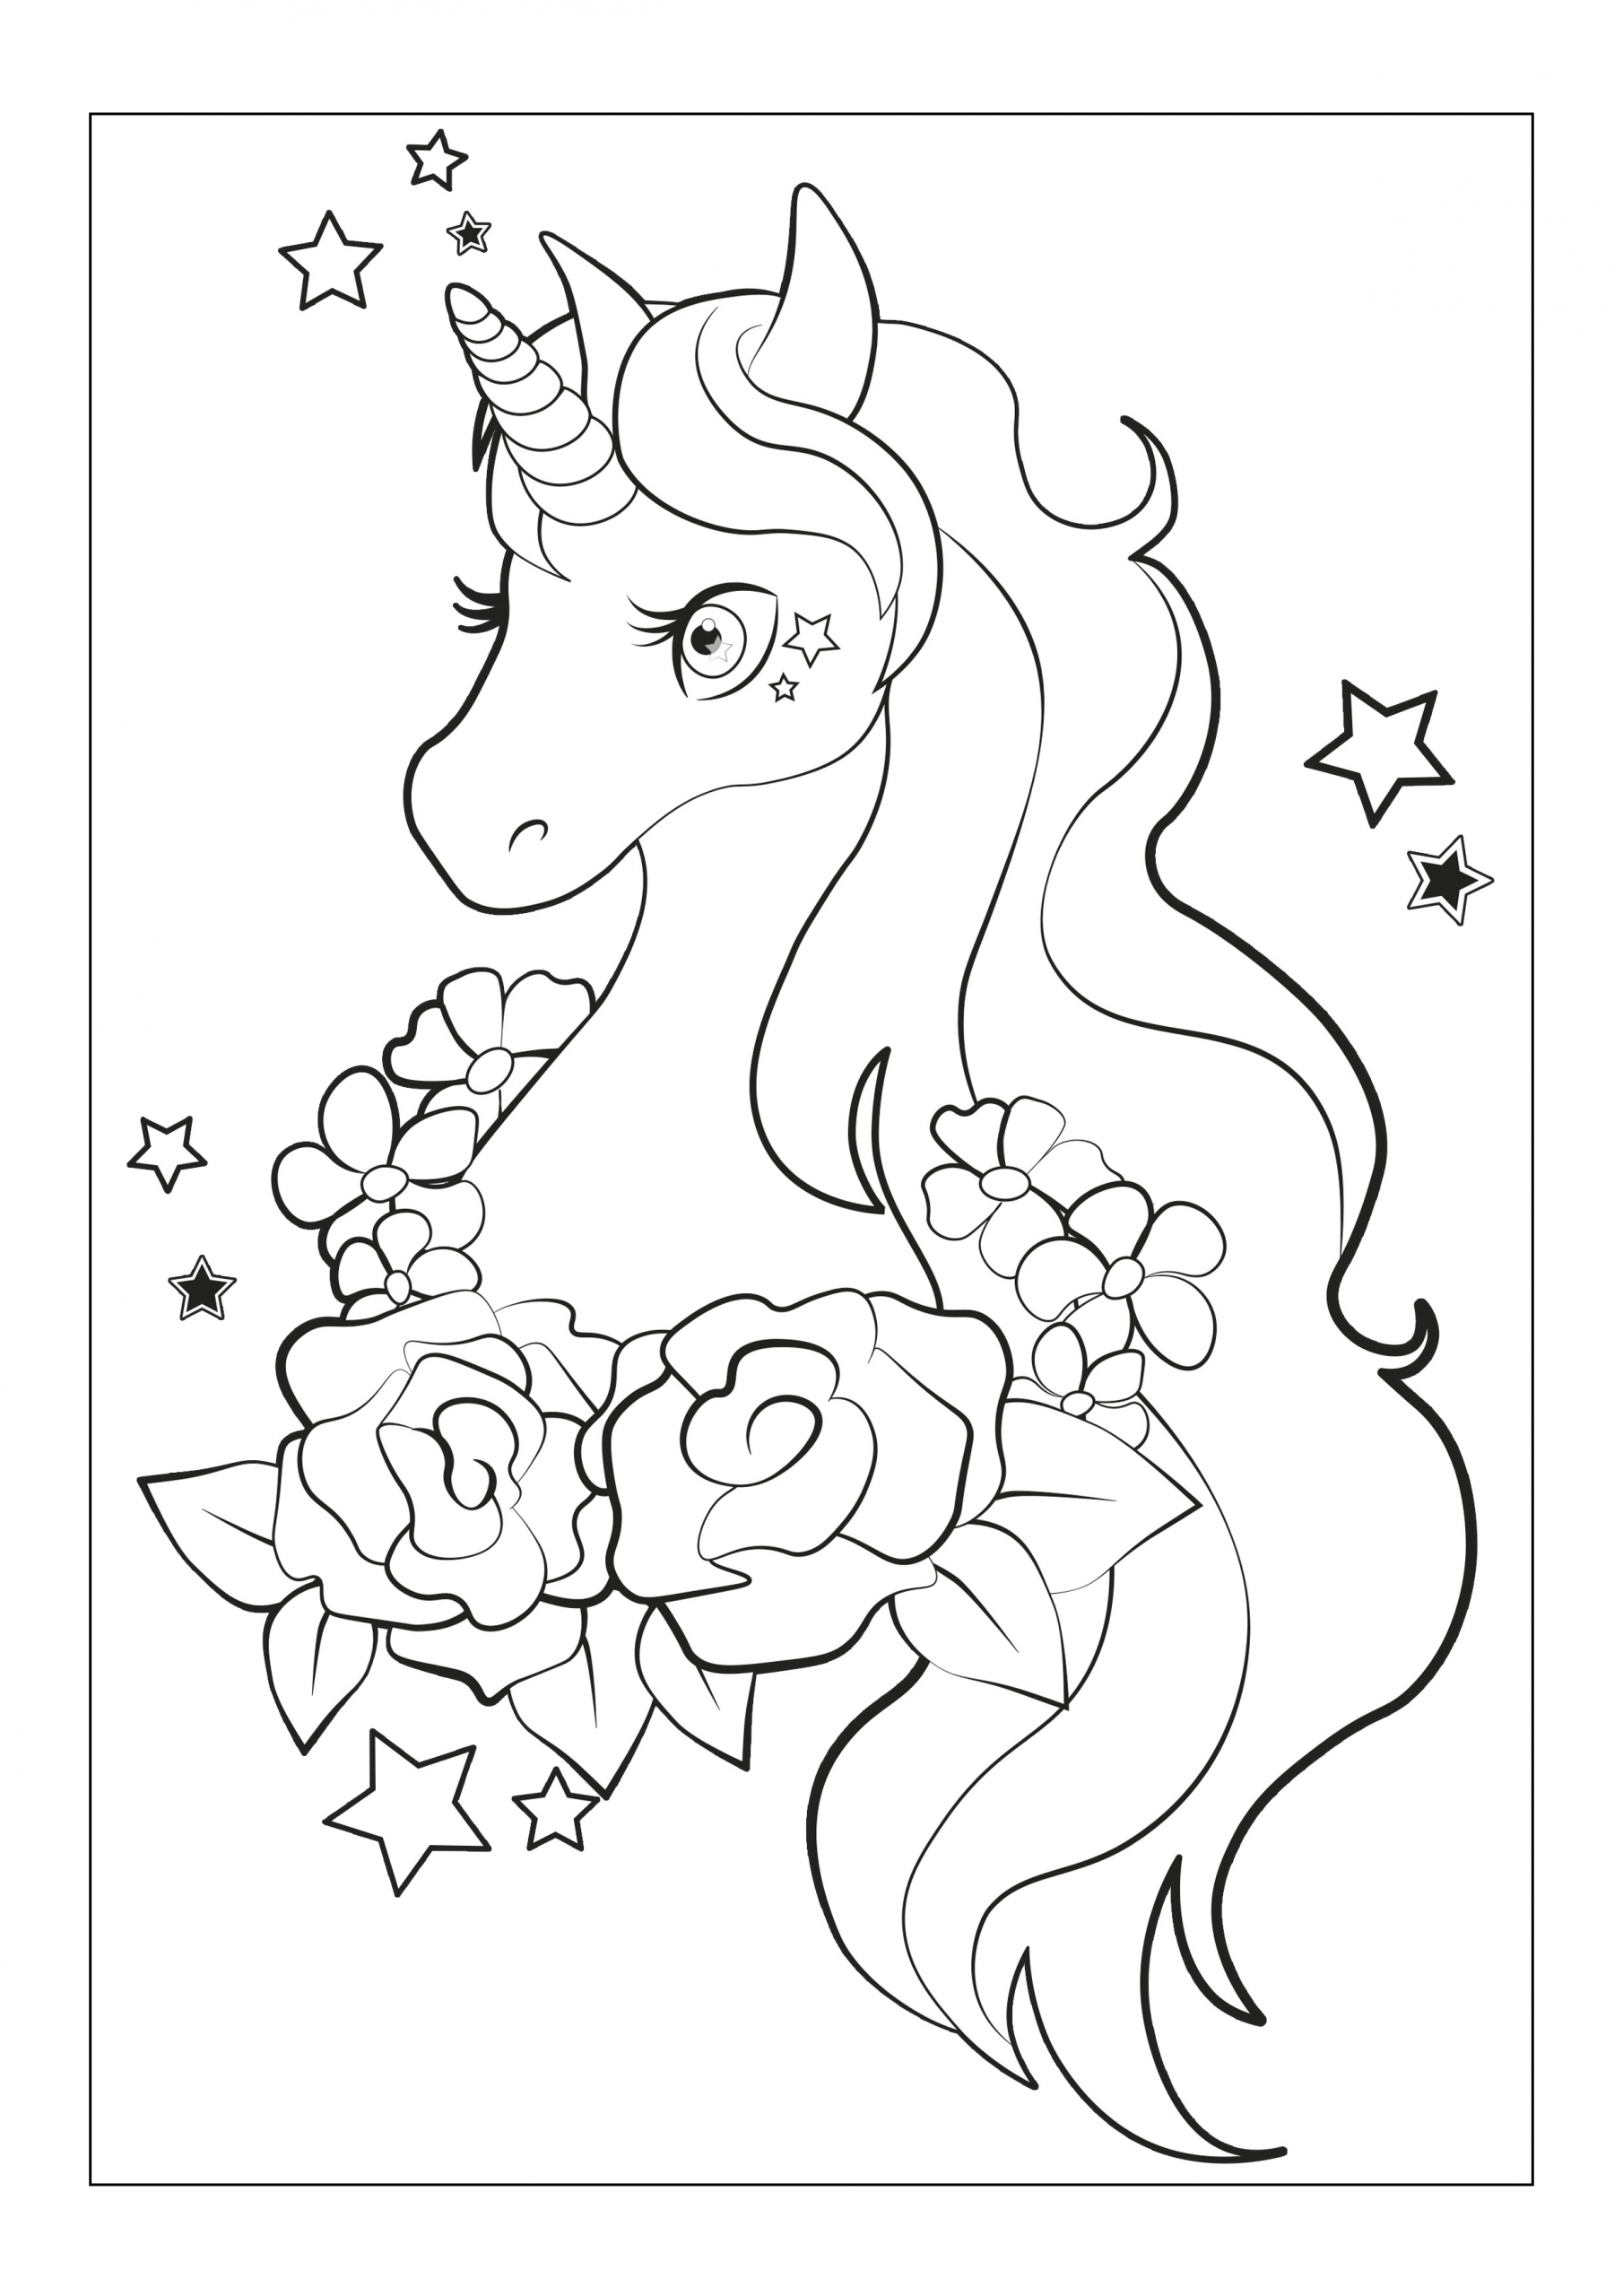 Free Coloring Pages For Girls
 The Best Free Coloring Pages For Girls